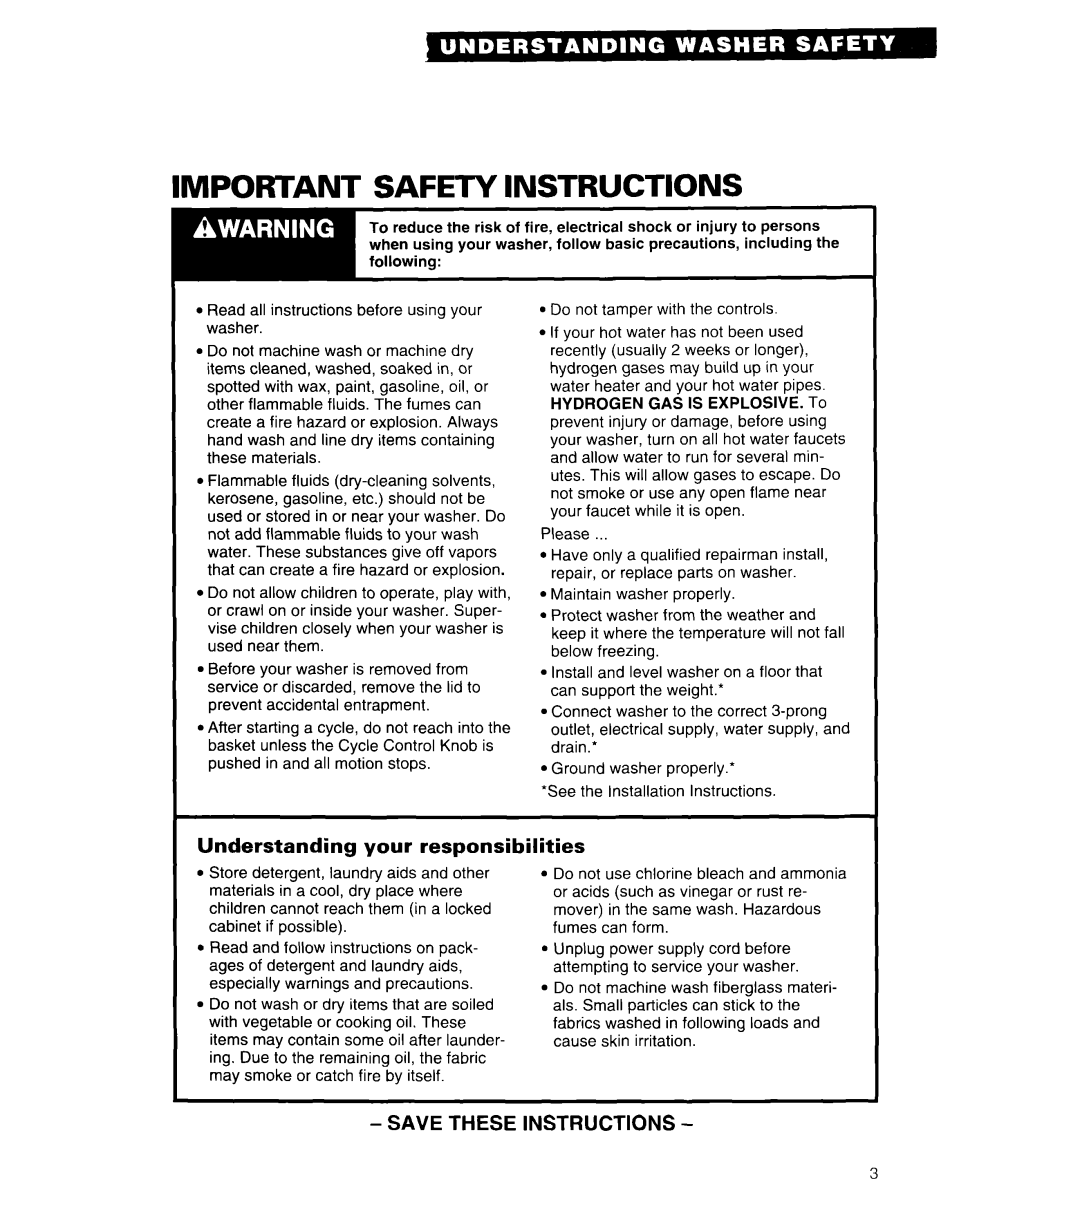 Whirlpool 3360461 warranty Important Safety Instructions, Understanding your responsibilities, Save These Instructions 